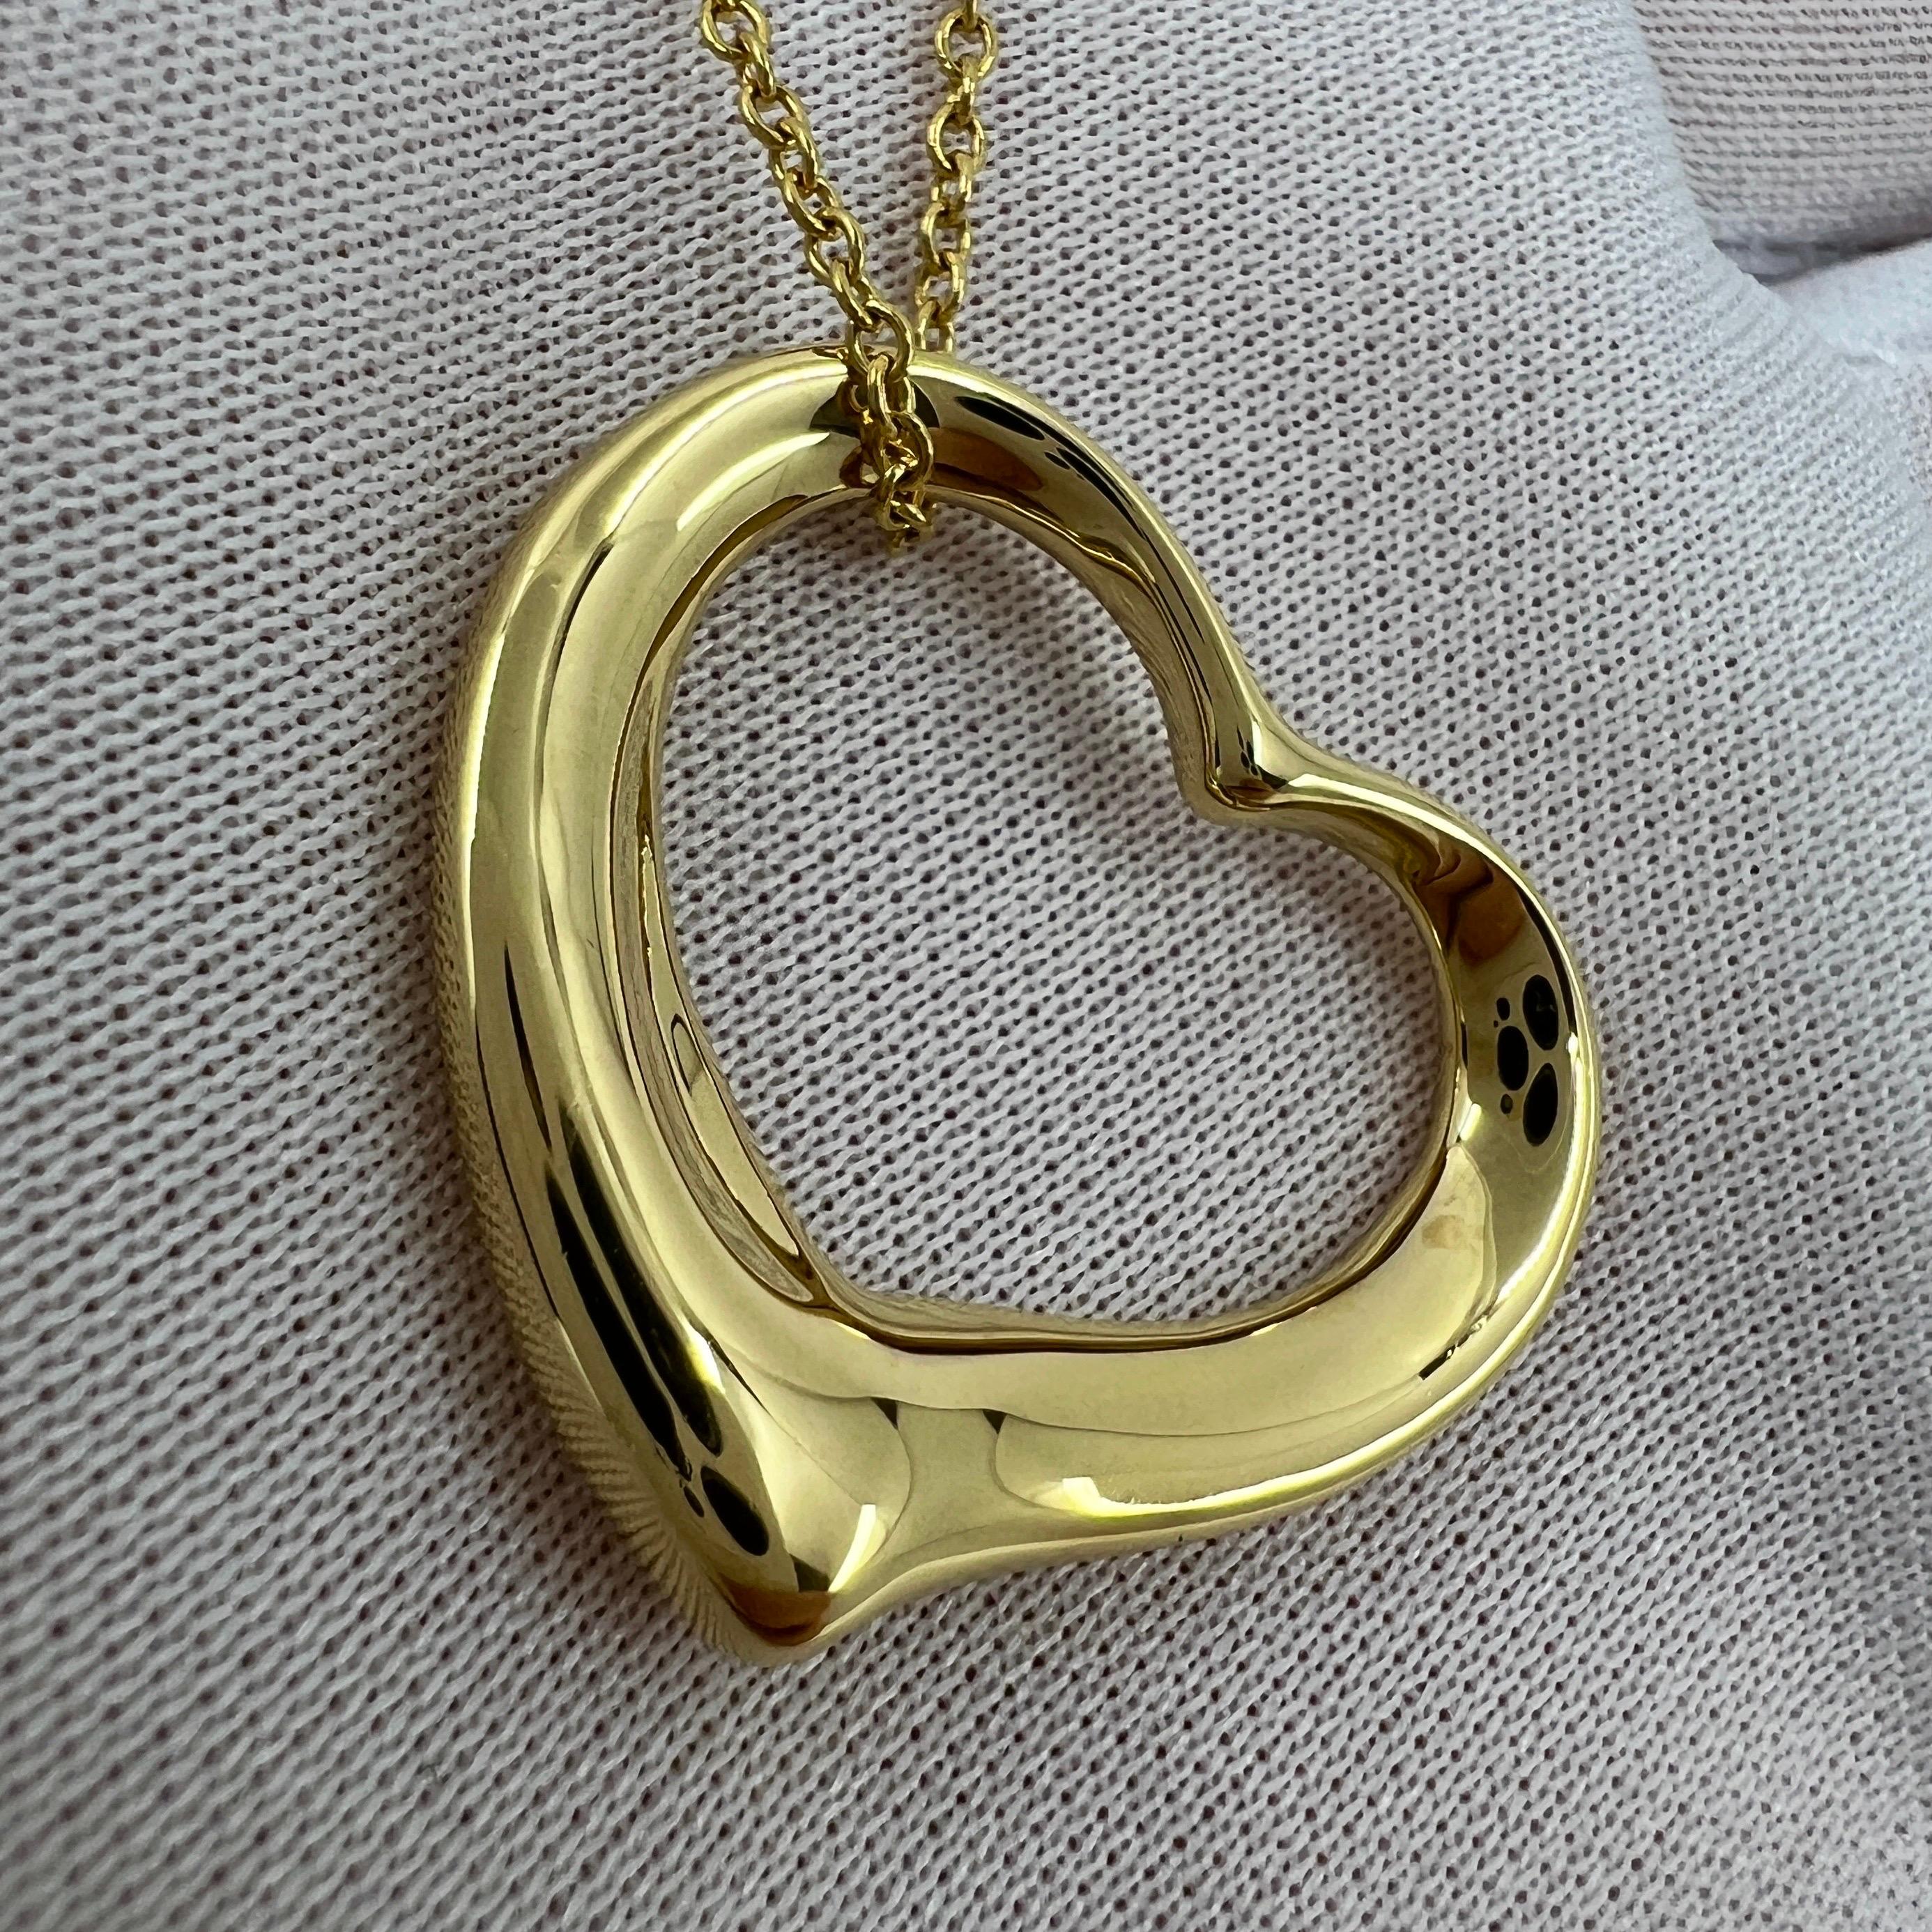 Tiffany & Co. Elsa Peretti Extra Large Open Heart 18k Gold Pendant Necklace For Sale 4